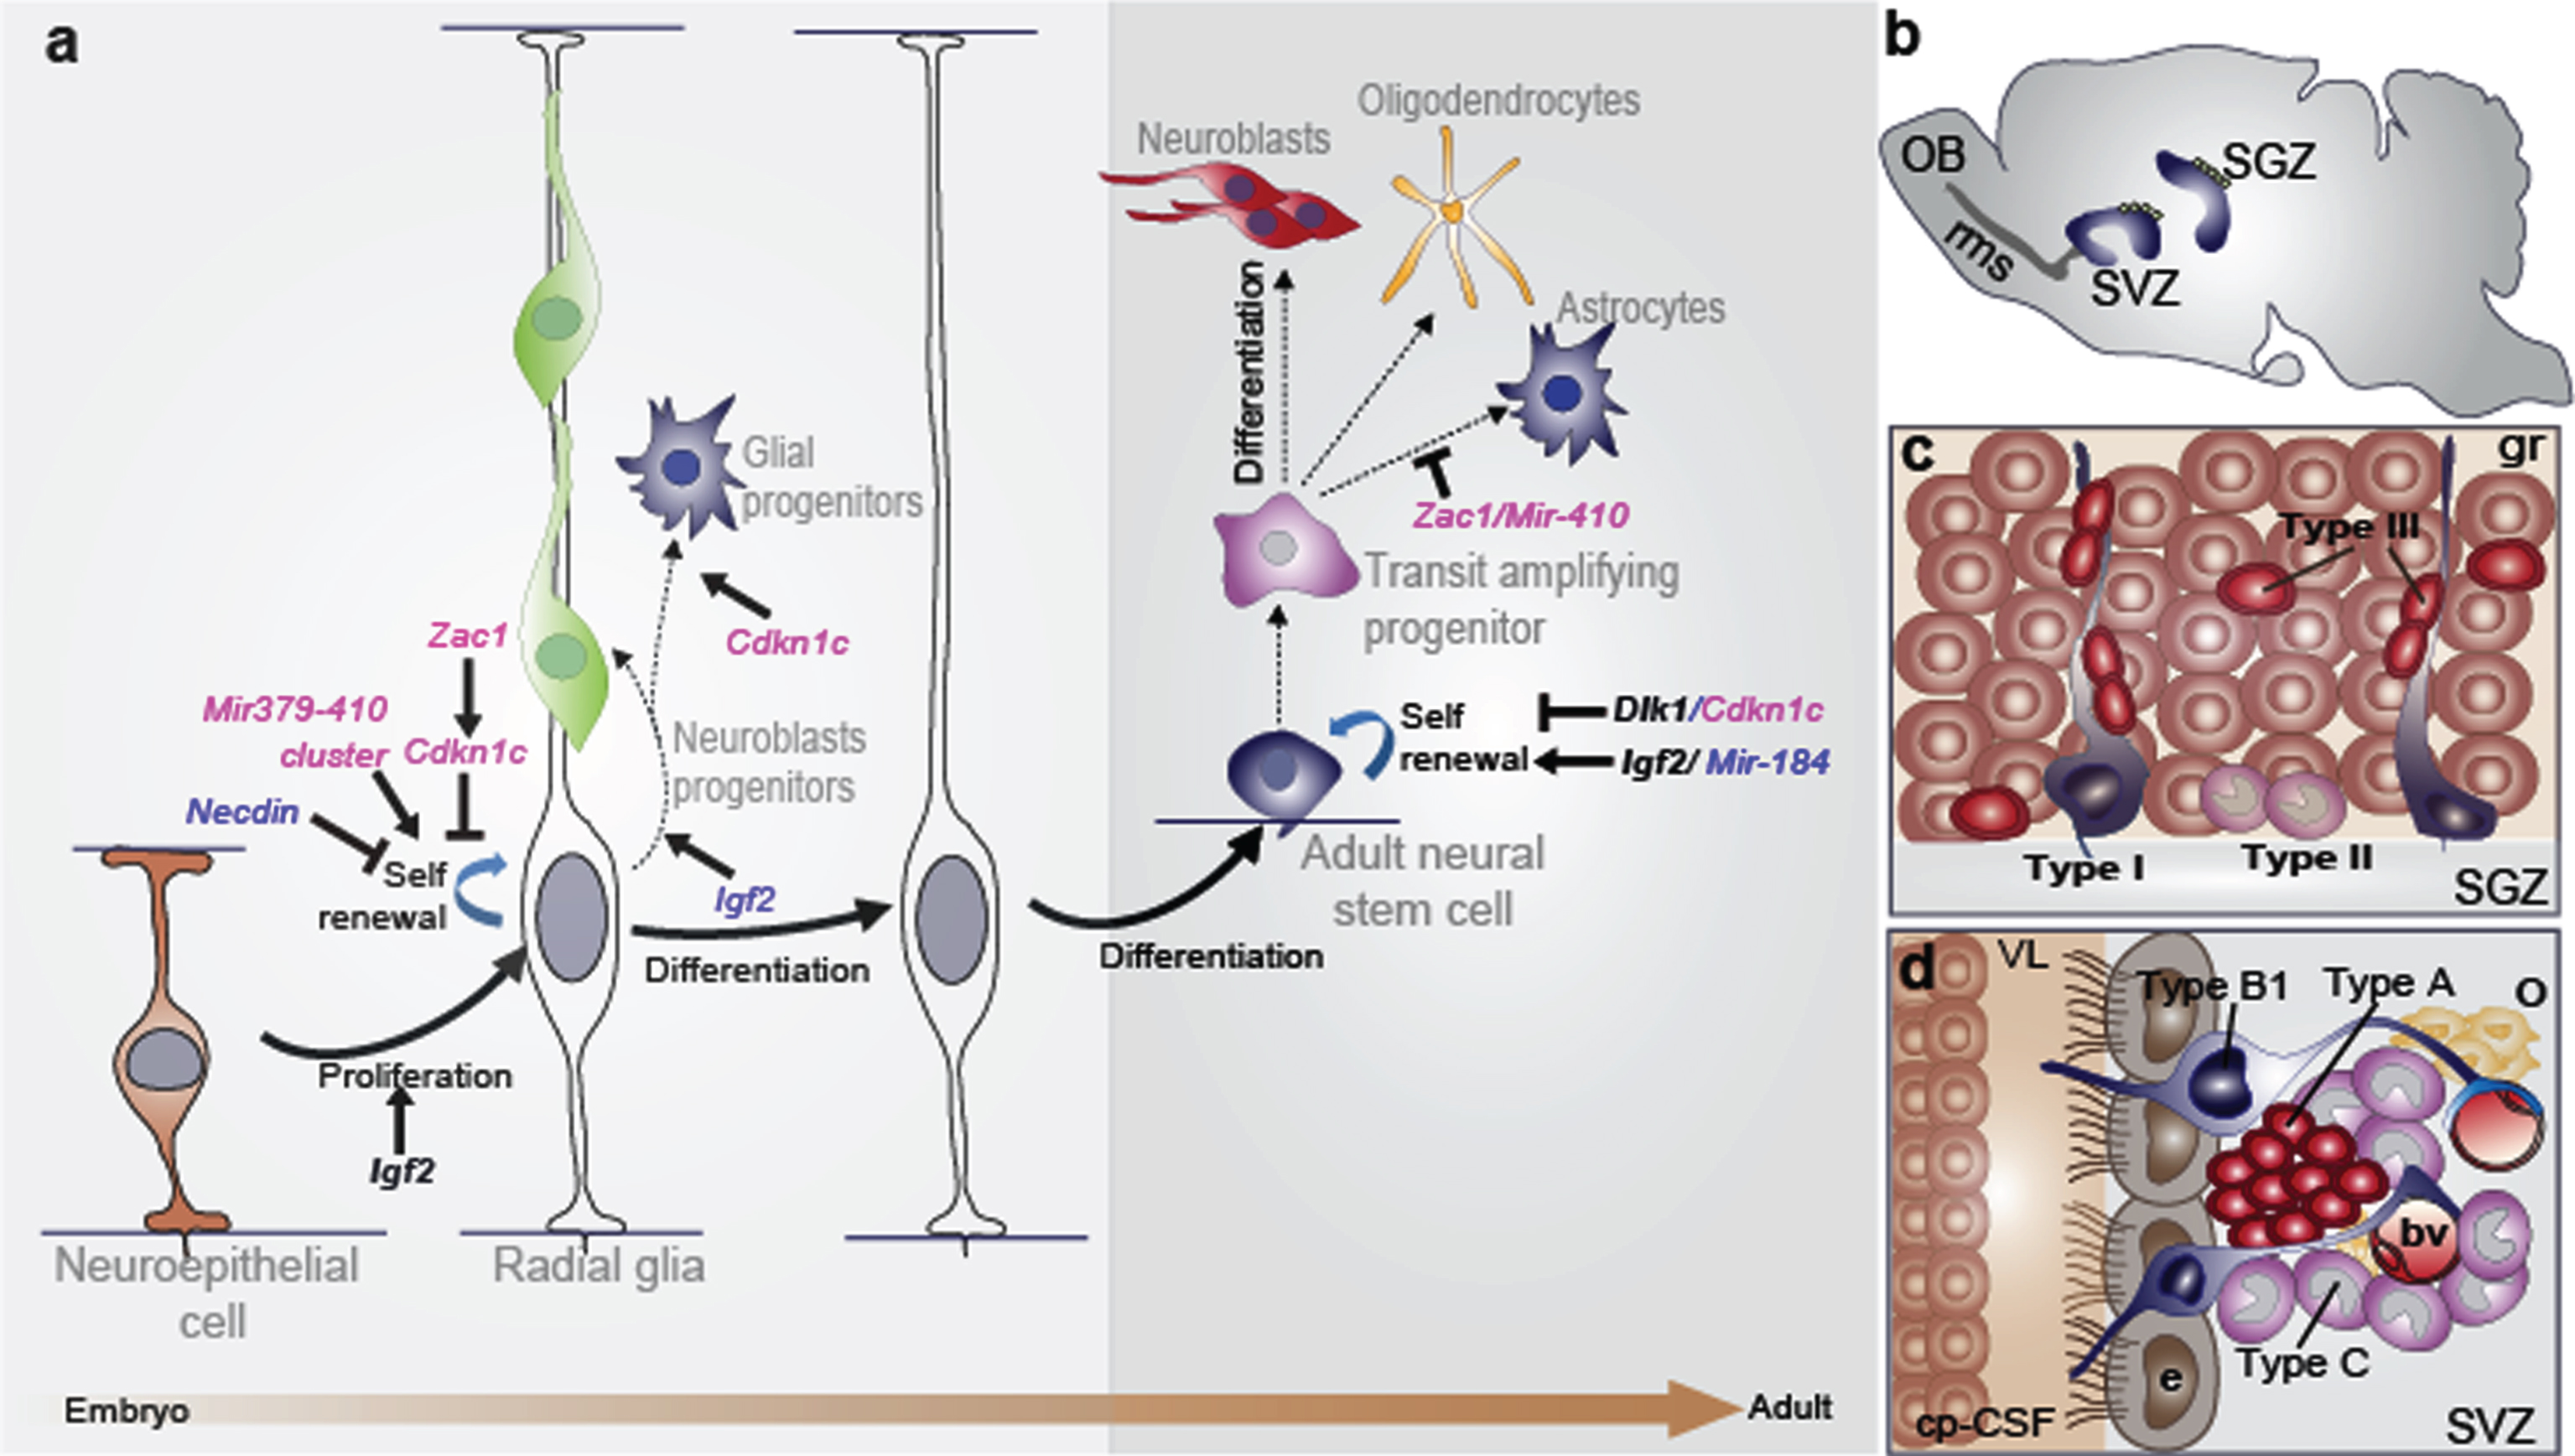 The radial glia nature of embryonic and adult neural stem cells: the role of imprinted genes. (a) There is a continuum of germinal activity that links neuroepithelial stem cells to radial glia and ultimately to the astrocytes that are stem cells in the adult brain. Radial glia in the neocortex produce several major brain cell classes, including neurons and astrocytes, via several rounds of proliferation and differentiation. The roles of the imprinted genes are indicated. Maternally and paternally expressed genes appear in pink and blue respectively. Imprinted genes that show biallelic expression are in black and bold. (b) Sagittal view showing the SVZ and the SGZ neurogenic niches in the adult mouse brain. In the SVZ, neuroblasts reach the olfactory bulb (OB) through the rostral migratory stream (rms). (c) Enlarged view of the SGZ: Type I stem cells (blue) show a radial single prolongation through the granular layer; type II precursors (purple) give rise to neuronal lineage-restricted progenitor type III cells (red) that differentiate into neurons, which in turn integrate into the granular layer (gr). (d) Enlarged view of the SVZ: type B1 stem cells (blue) contact the ventricle with a thin process extending between the ependymal cells (e; grey); transit-amplifying progenitors (TAP) or type C cells (purple) give rise to type A cells (red) and oligodendrocytes progenitors (yellow). Dividing stem cells and their TAP progeny are tightly apposed to blood vessels (bv); the choroid plexus-cerebrospinal fluid system (cp-CSF) is shown.